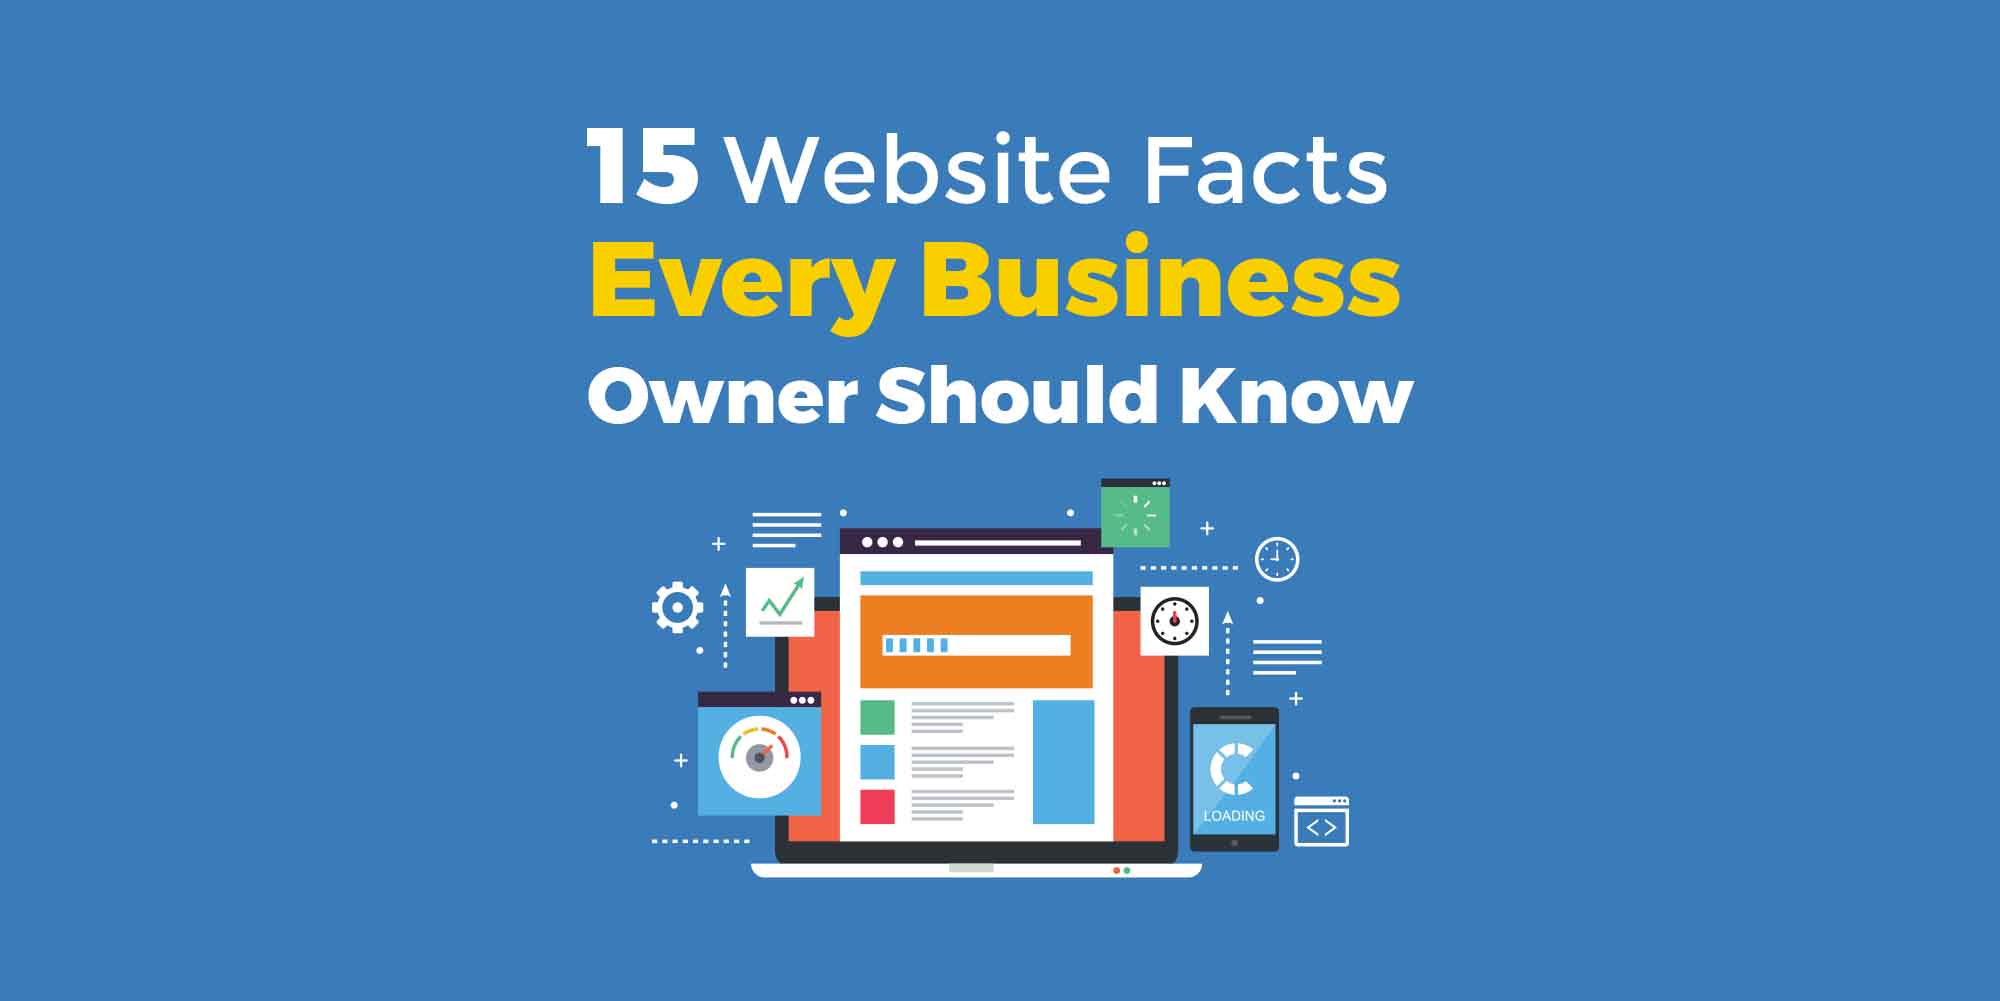 15 website facts for business owners